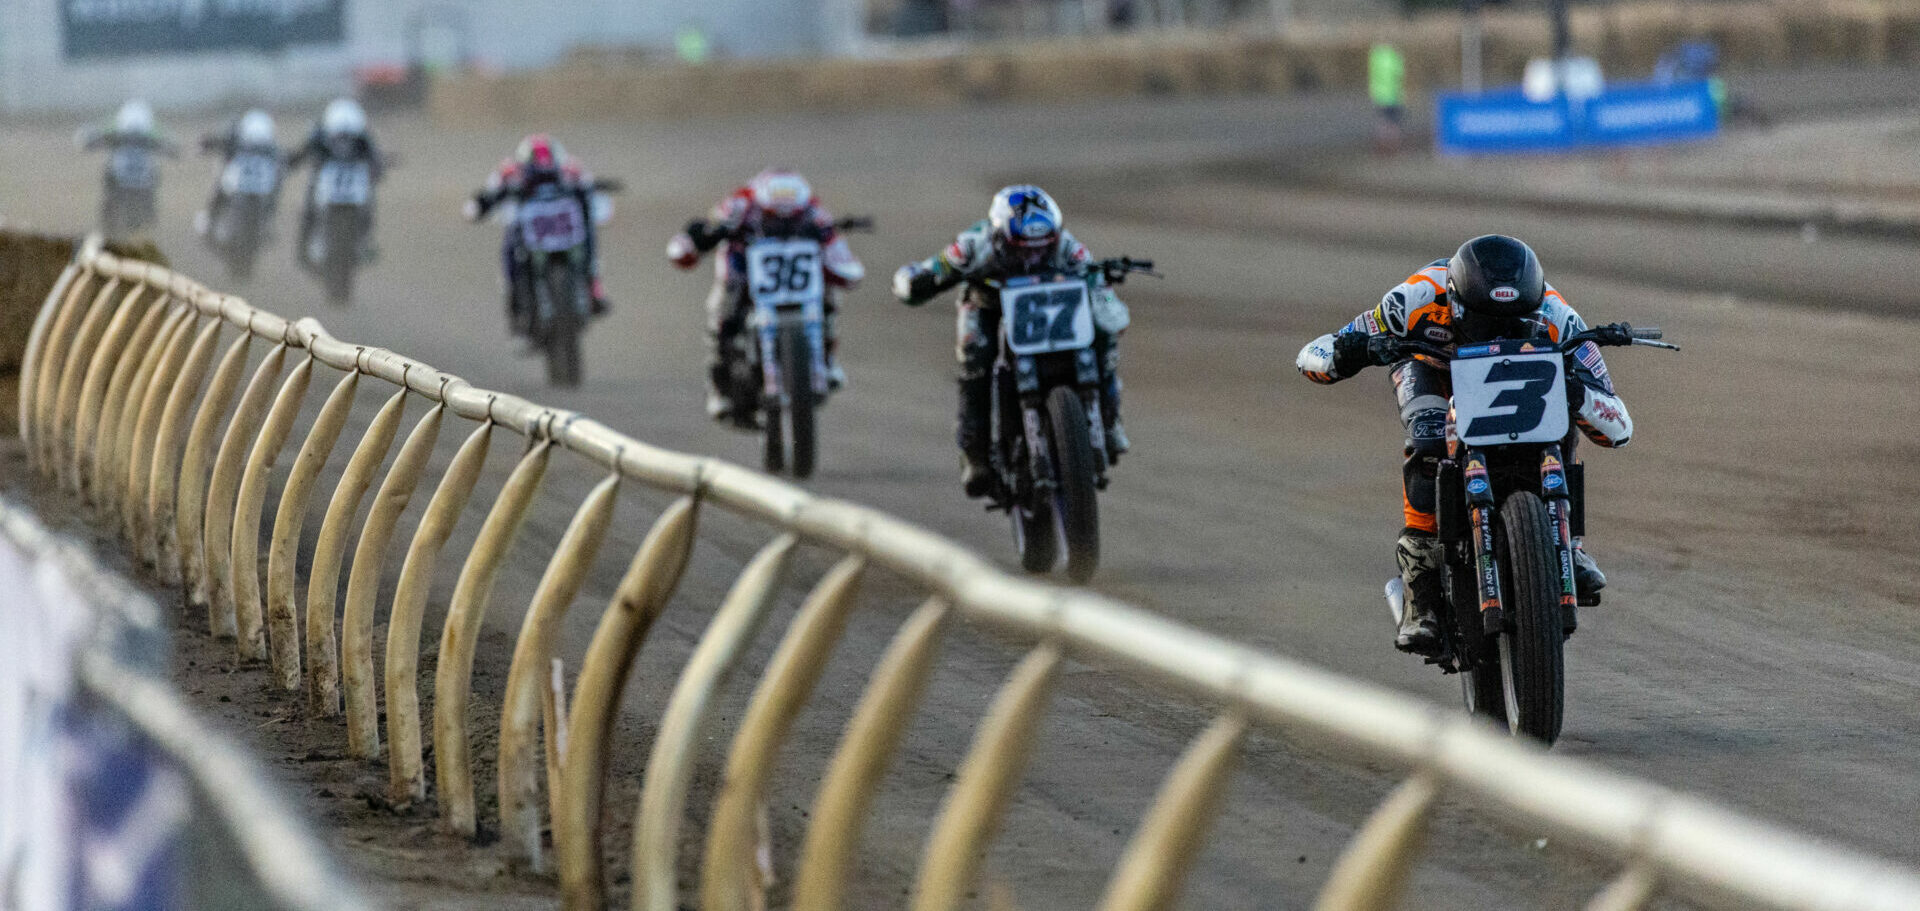 Tickets for the Progressive American Flat Track (AFT) Du Quoin Mile June 17 in Illinois are on sale now. Photo by Tim Lester, courtesy AFT.